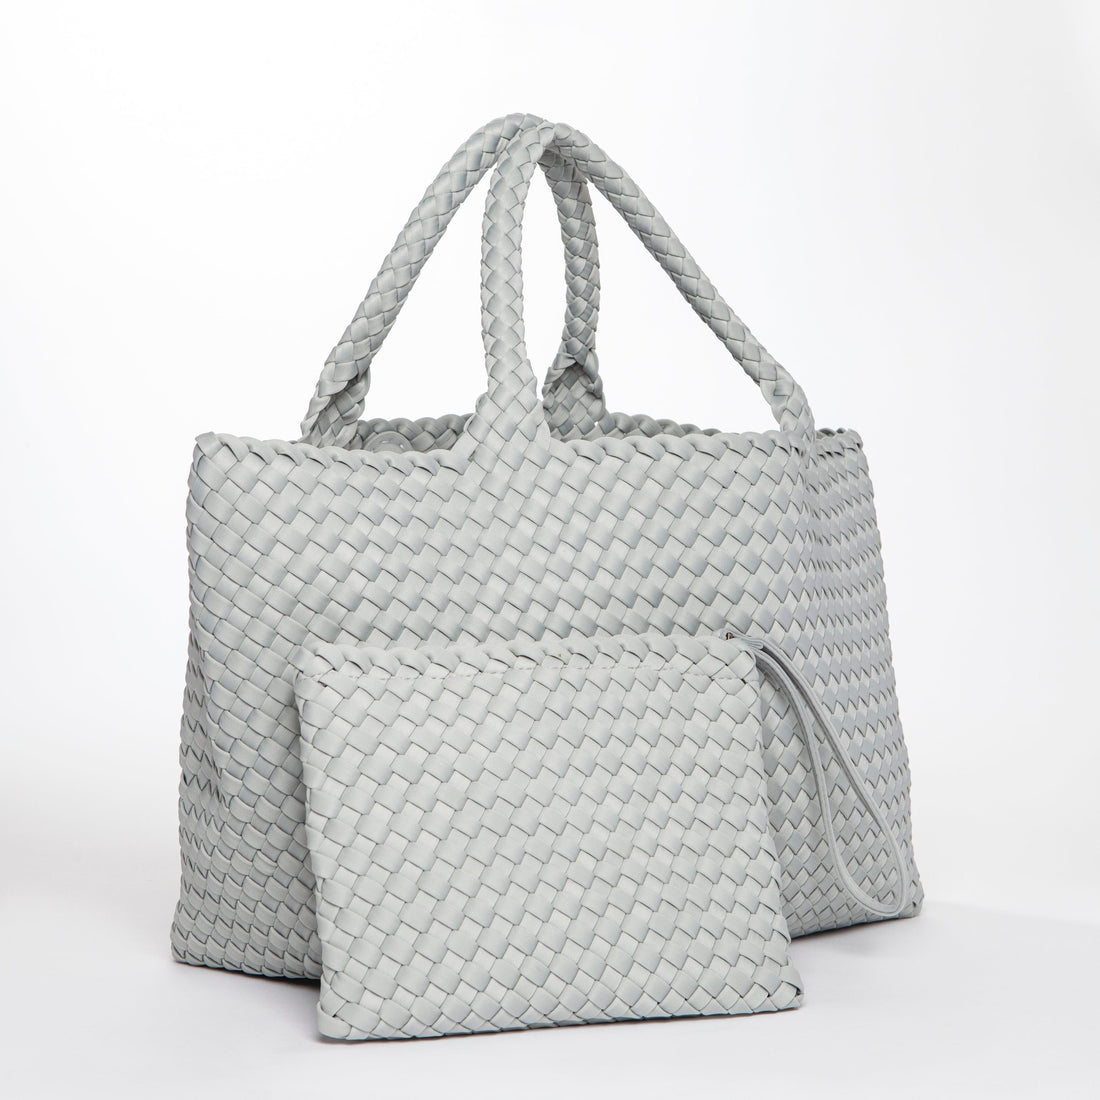 Andreina Bags Vida Tote XL Carryall Bags. Great quality, great product, machine washeable. Women handbag on the go essentials. Light Grey XL Vida Tote.